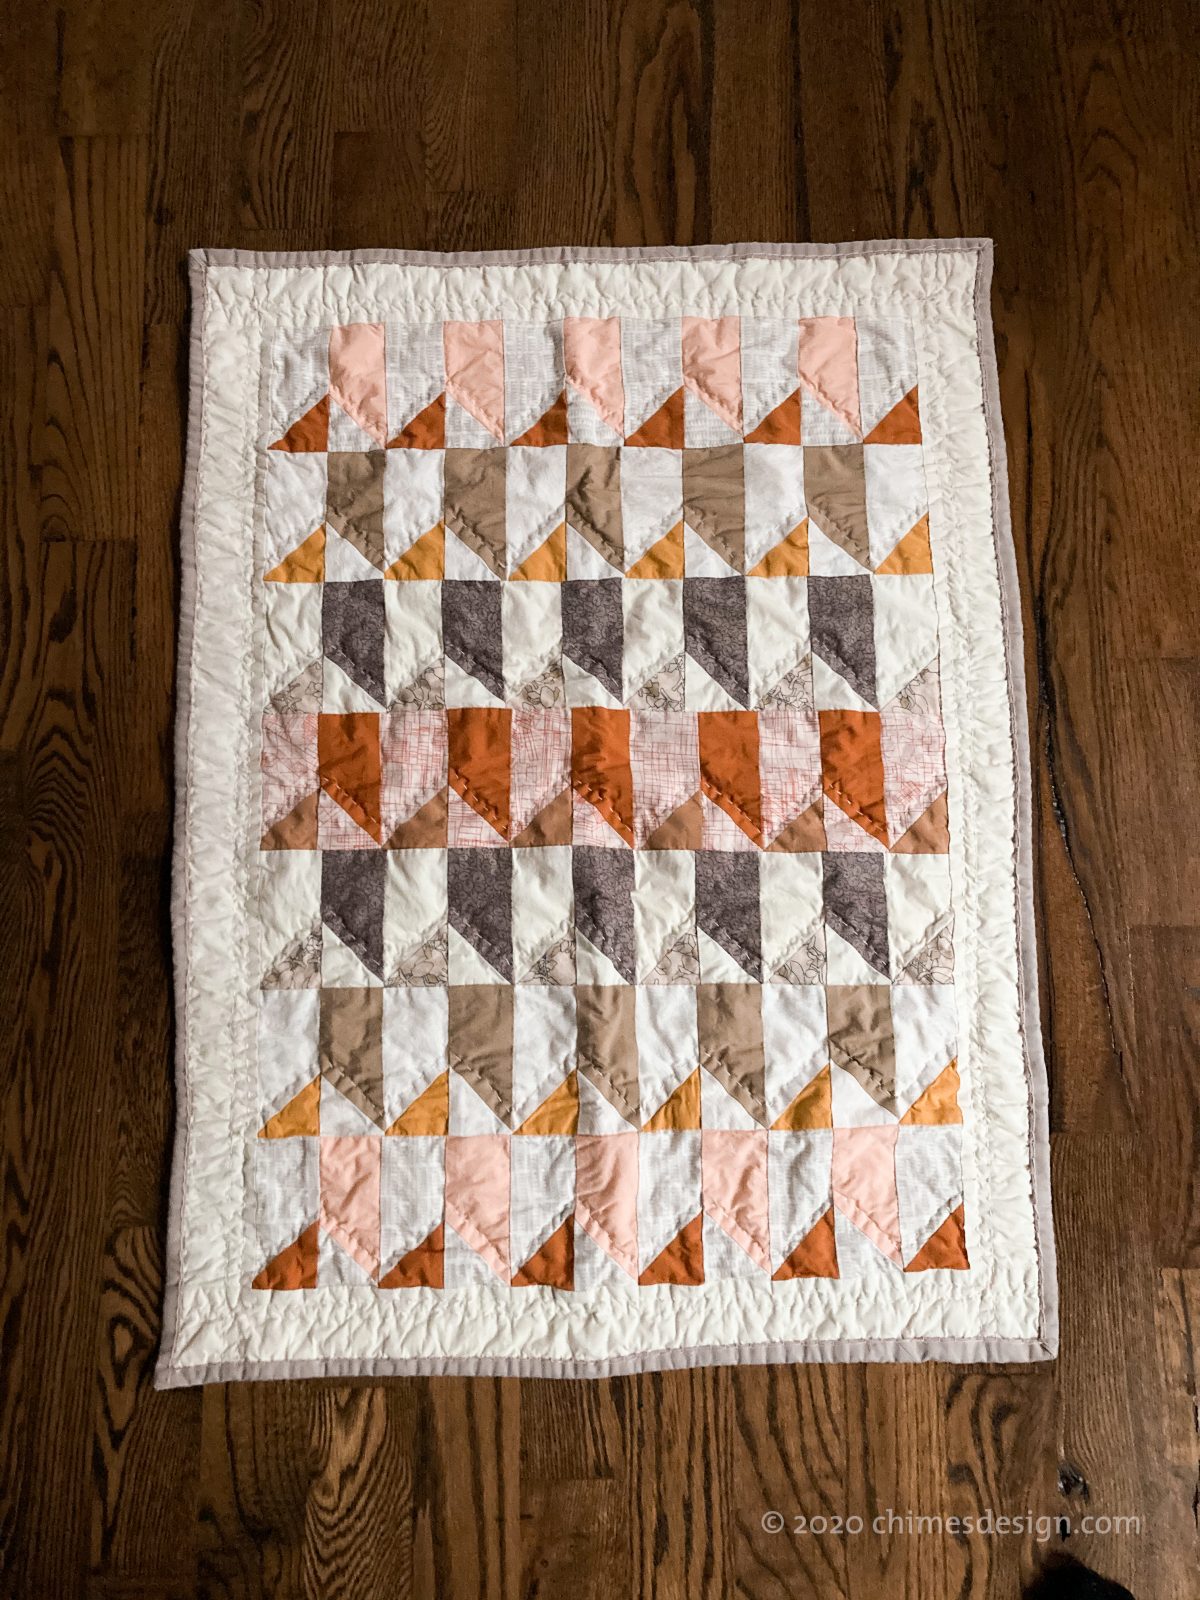 A patchwork quilt with large quilt stitches on a wood floor